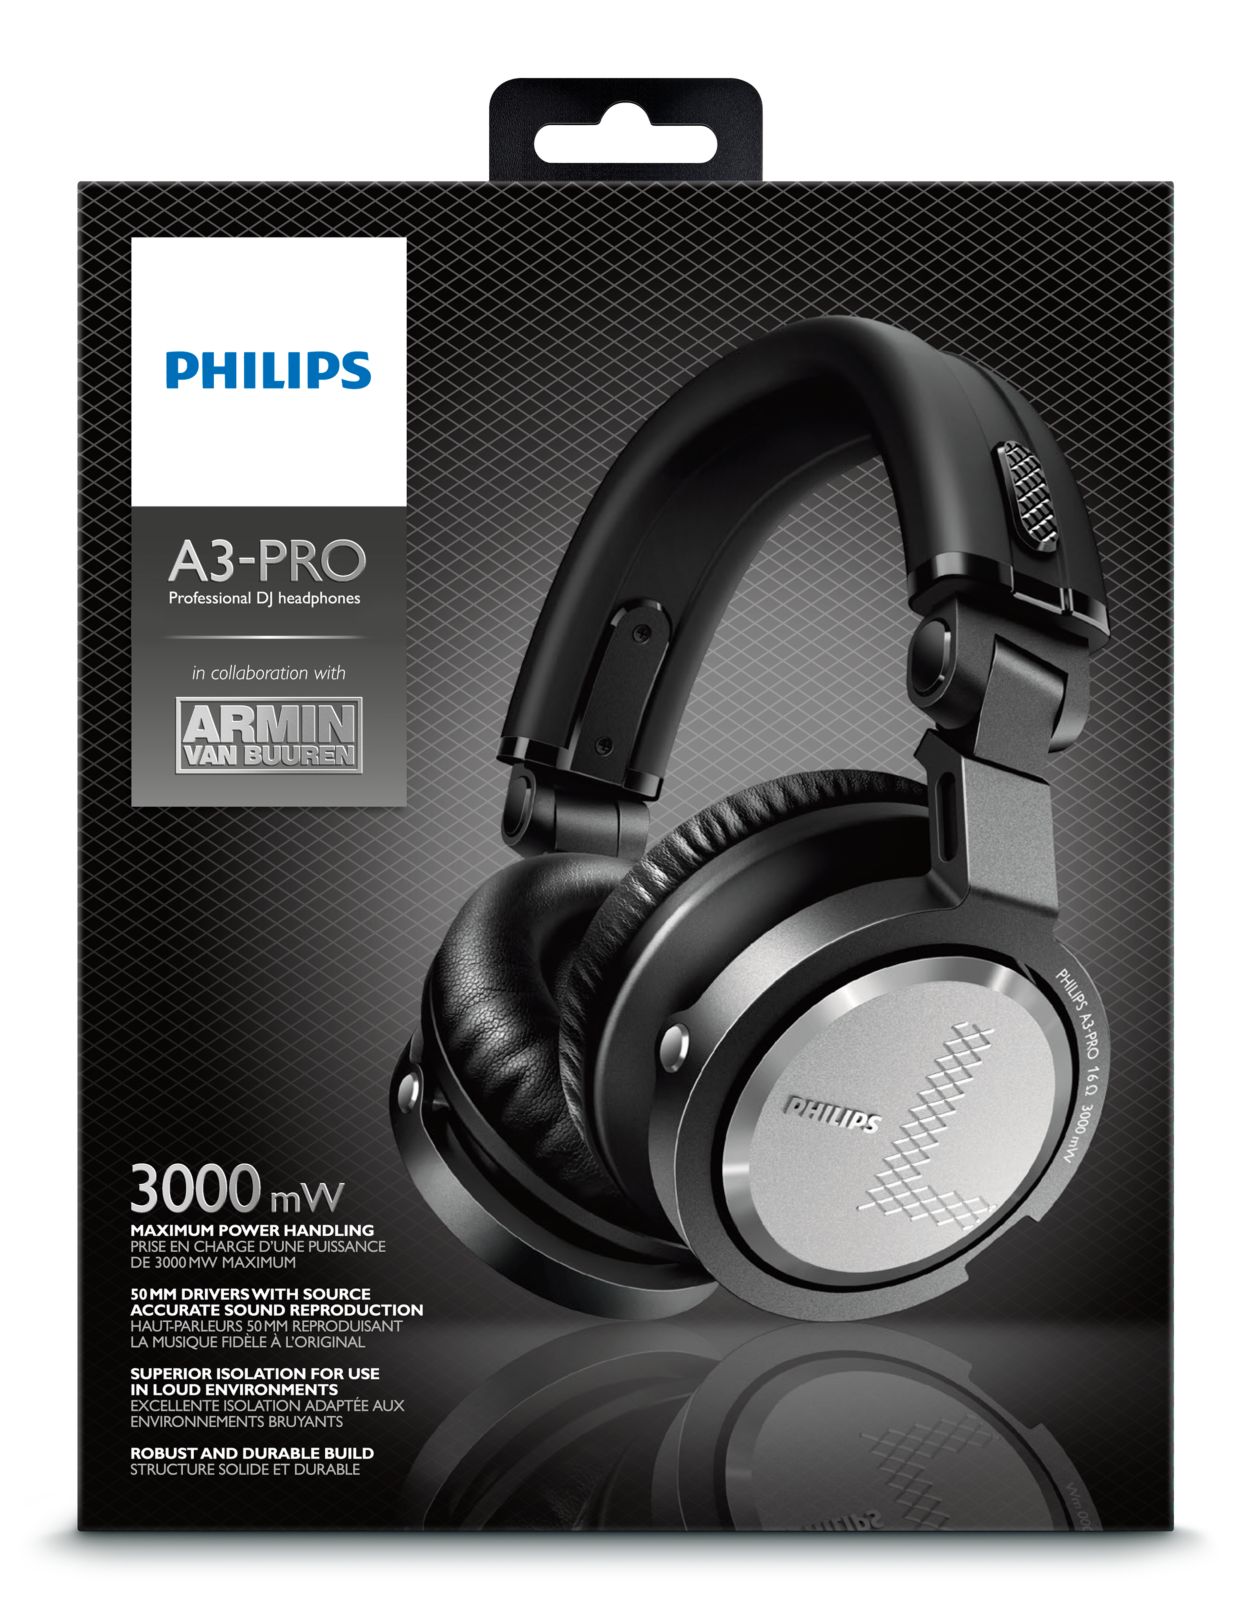 Philips Professional DJ A3PRO - full specs, details and review